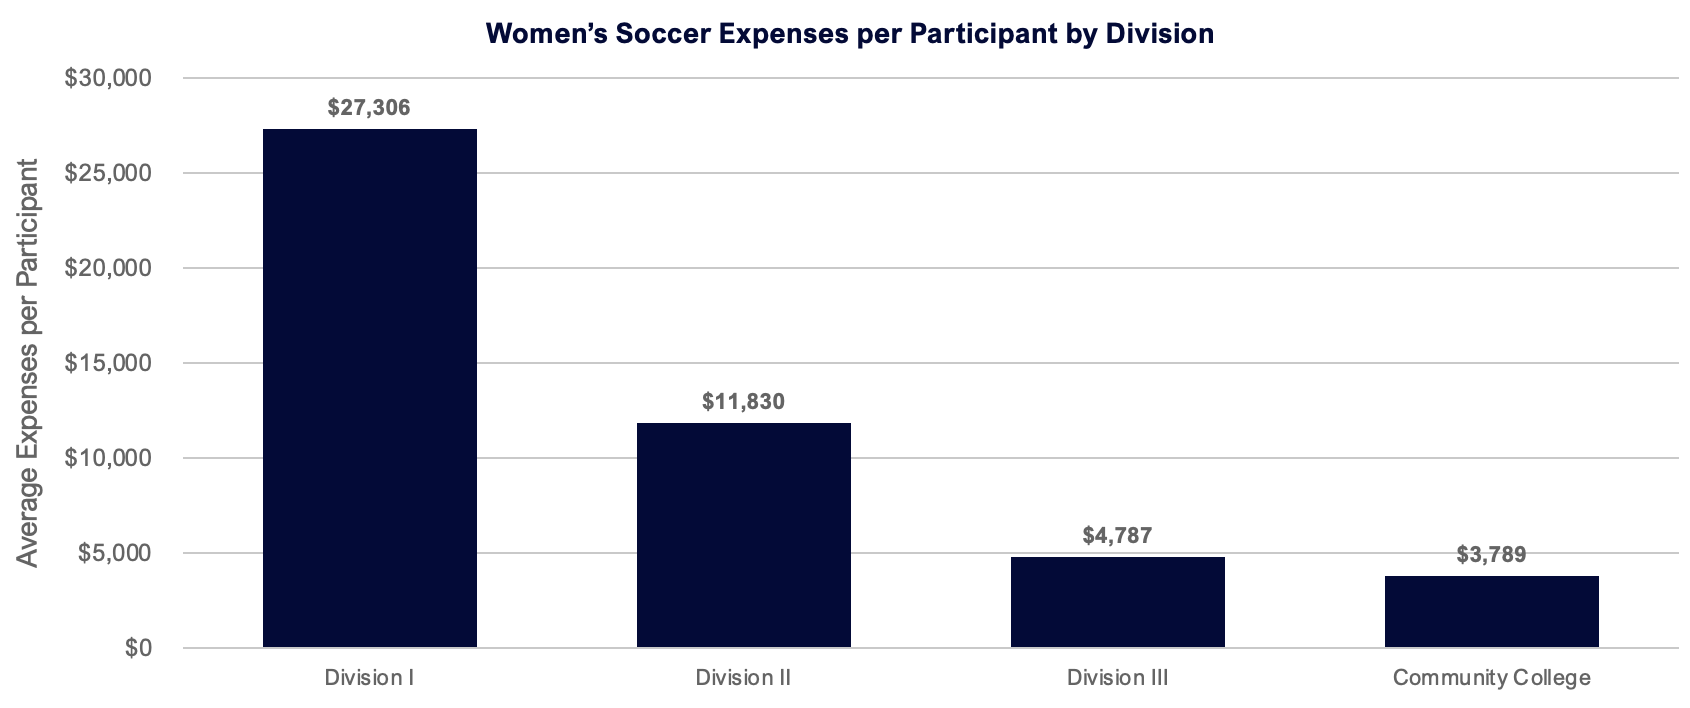 Women's soccer expenses per participant by division